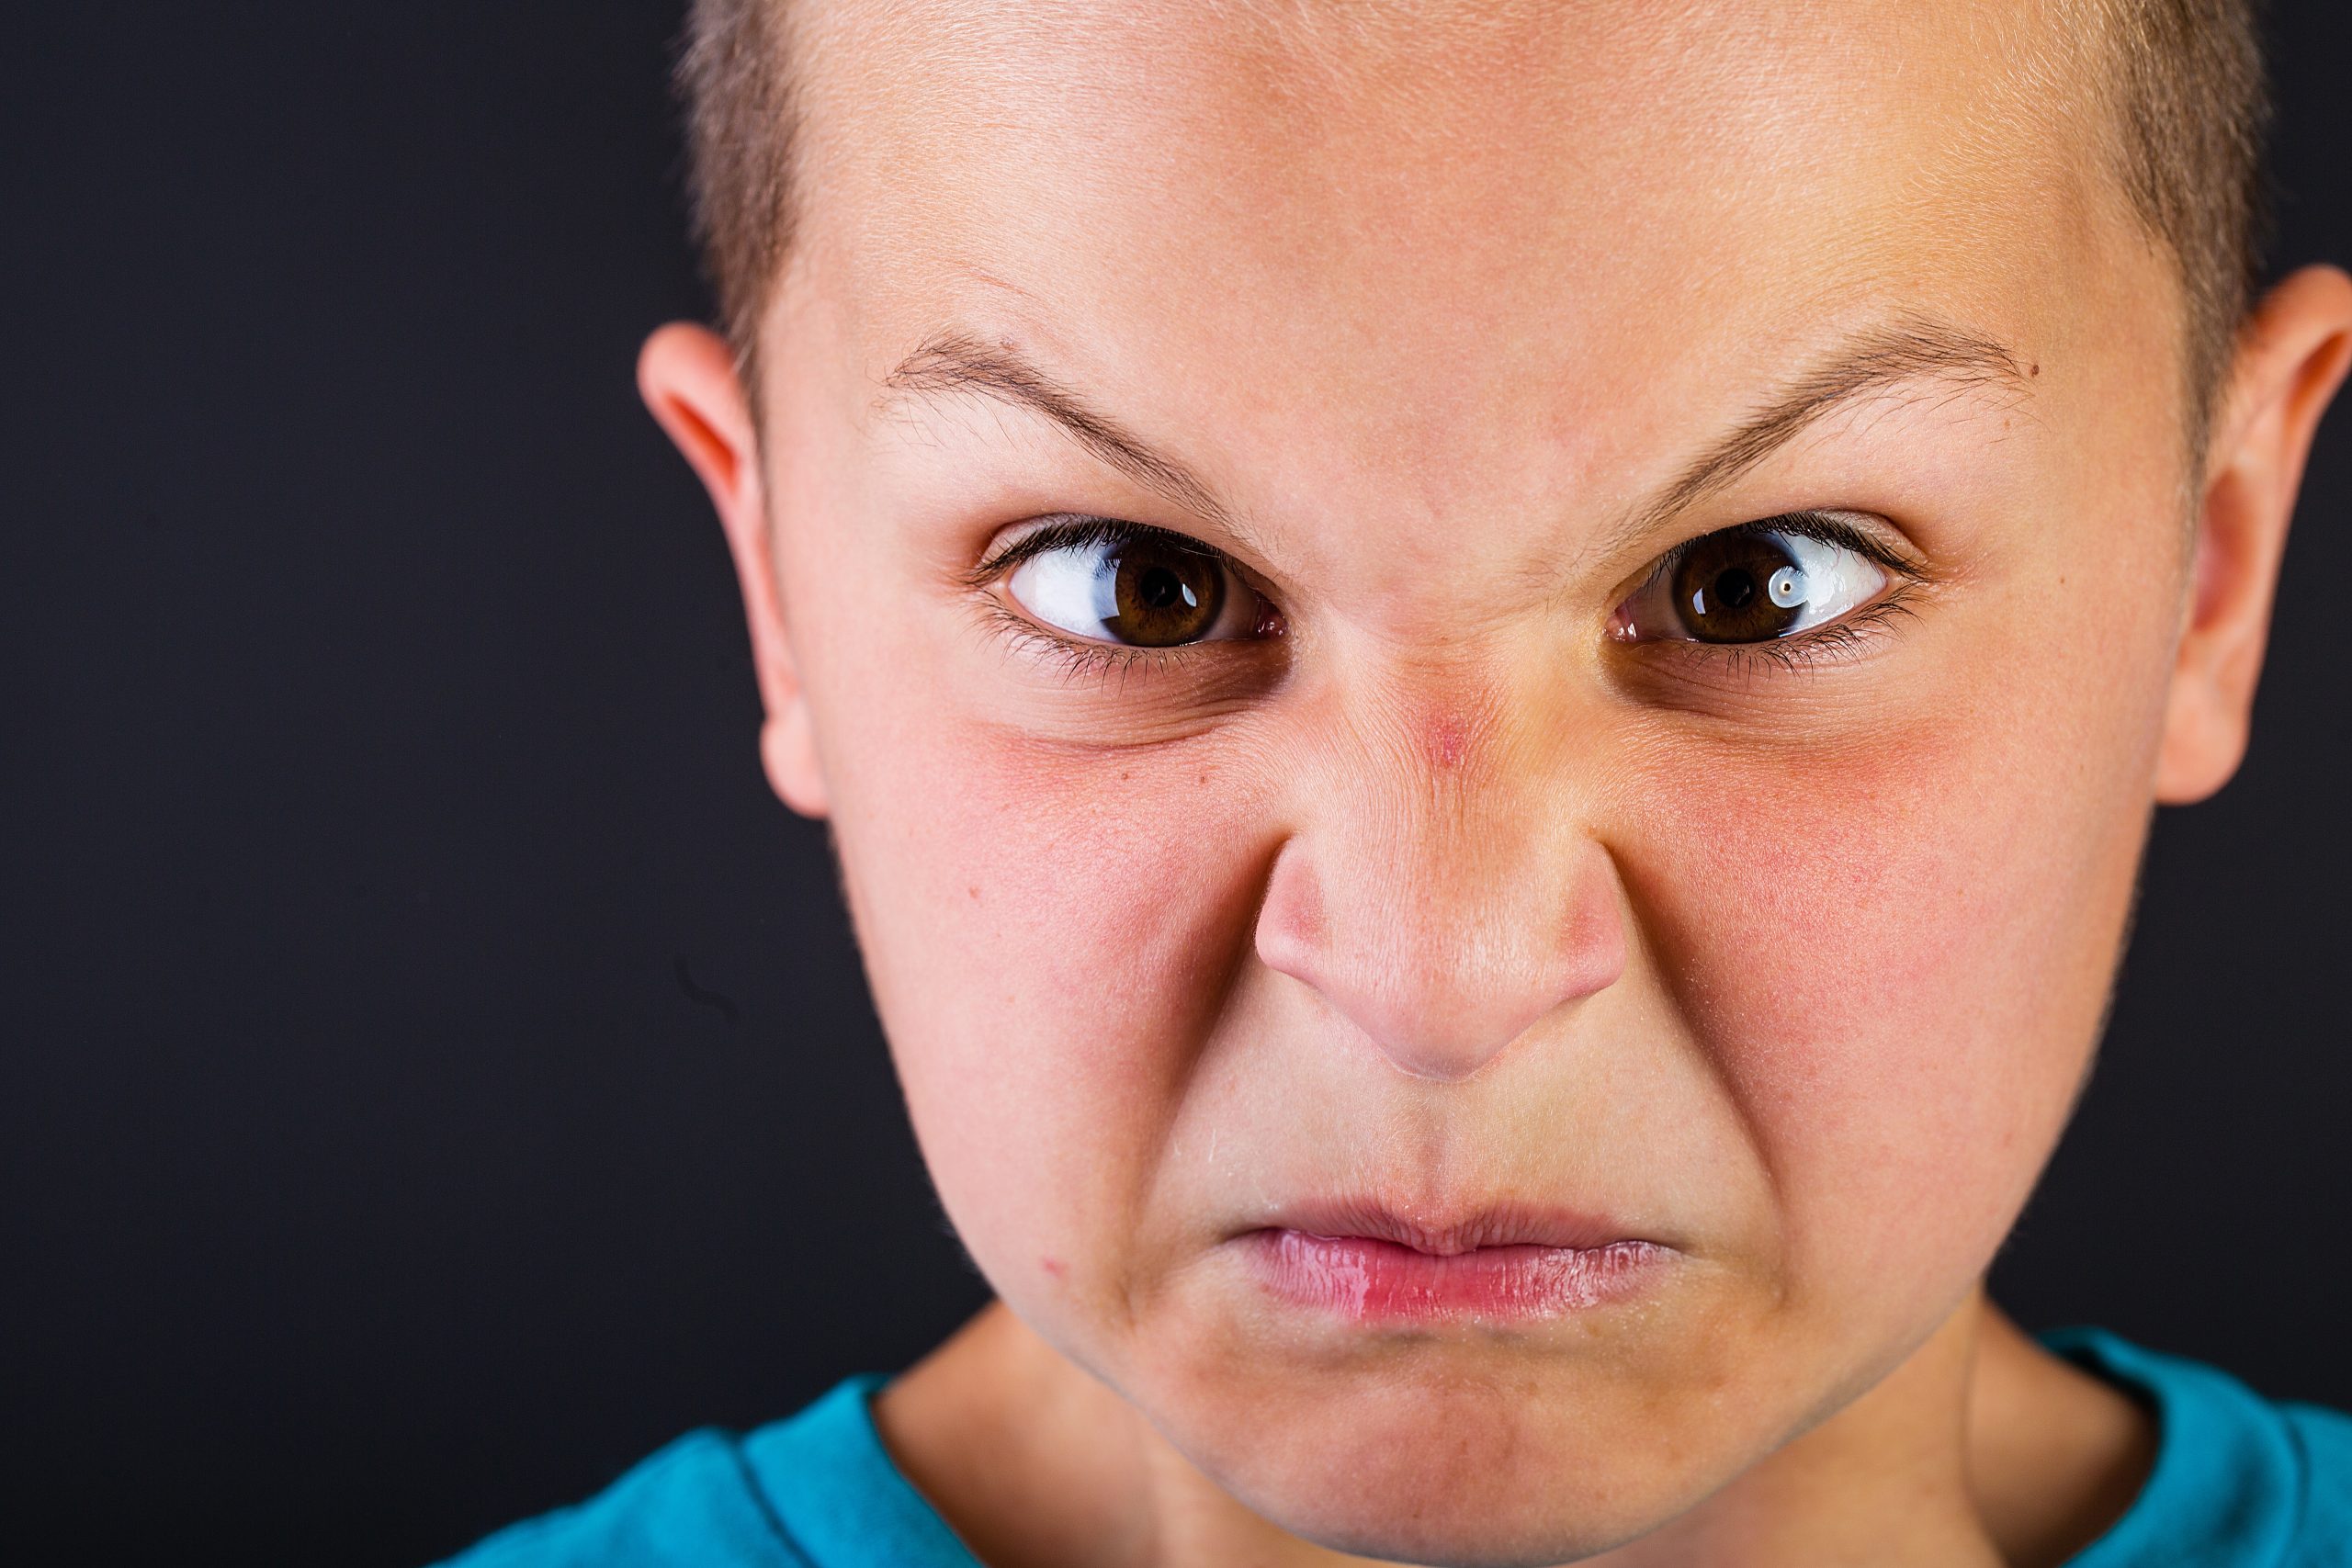 Recognizing the Causes of Your Child’s Disruptive Behavior